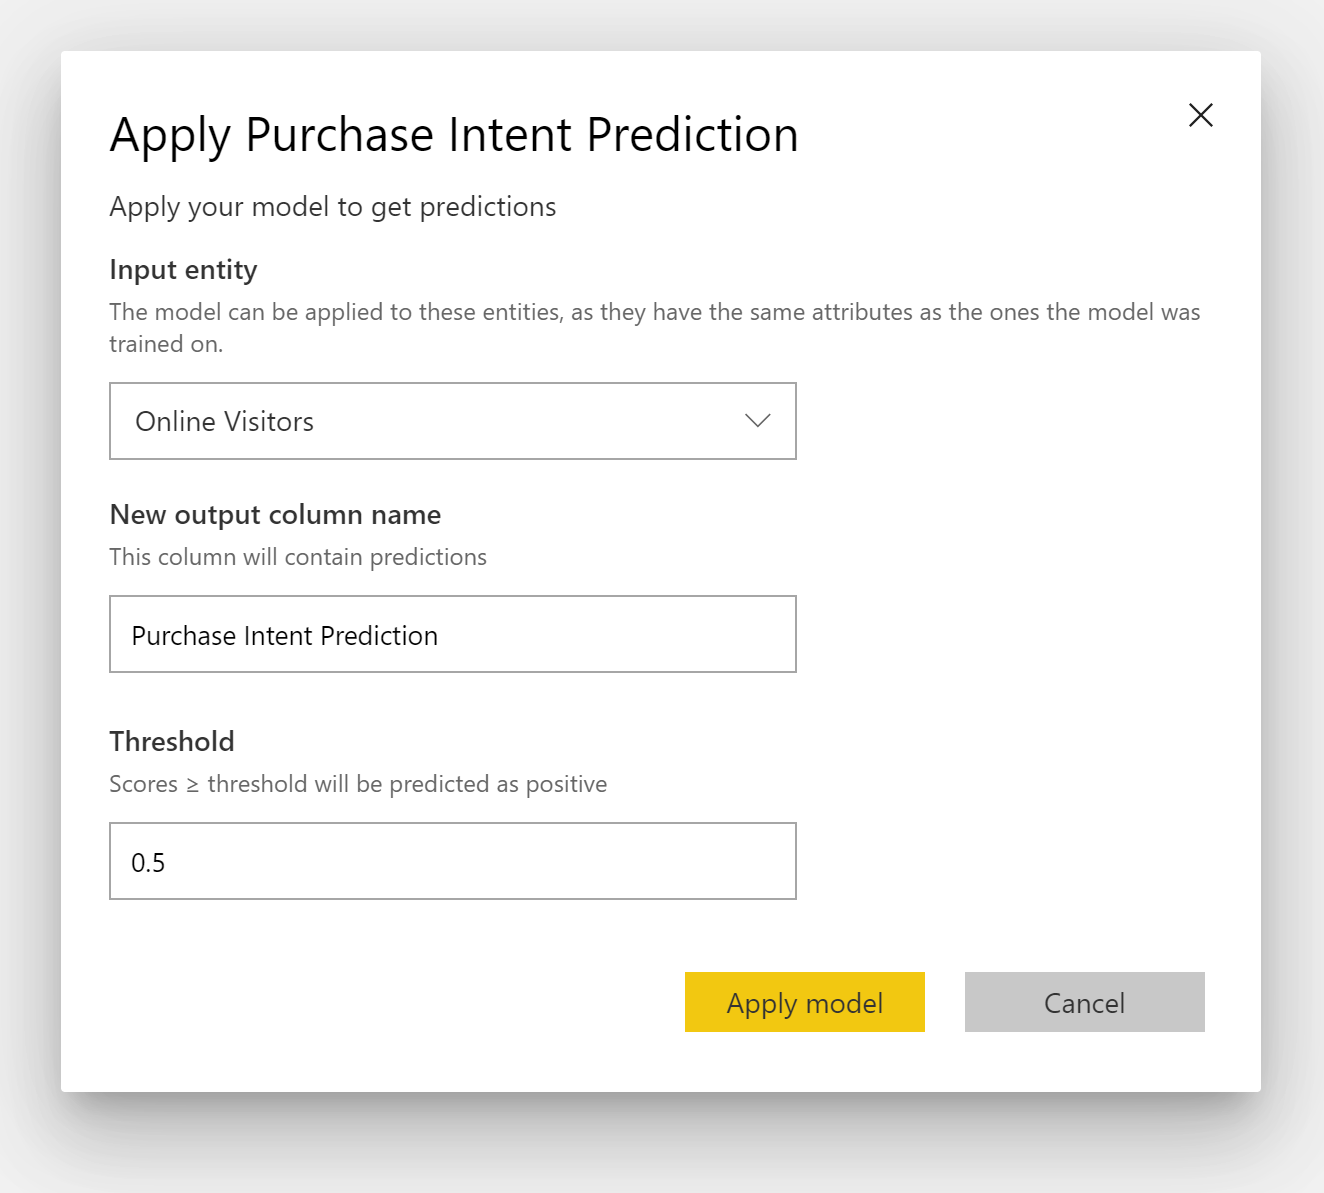 Screenshot of the Apply Purchase Intent Prediction dialog box.